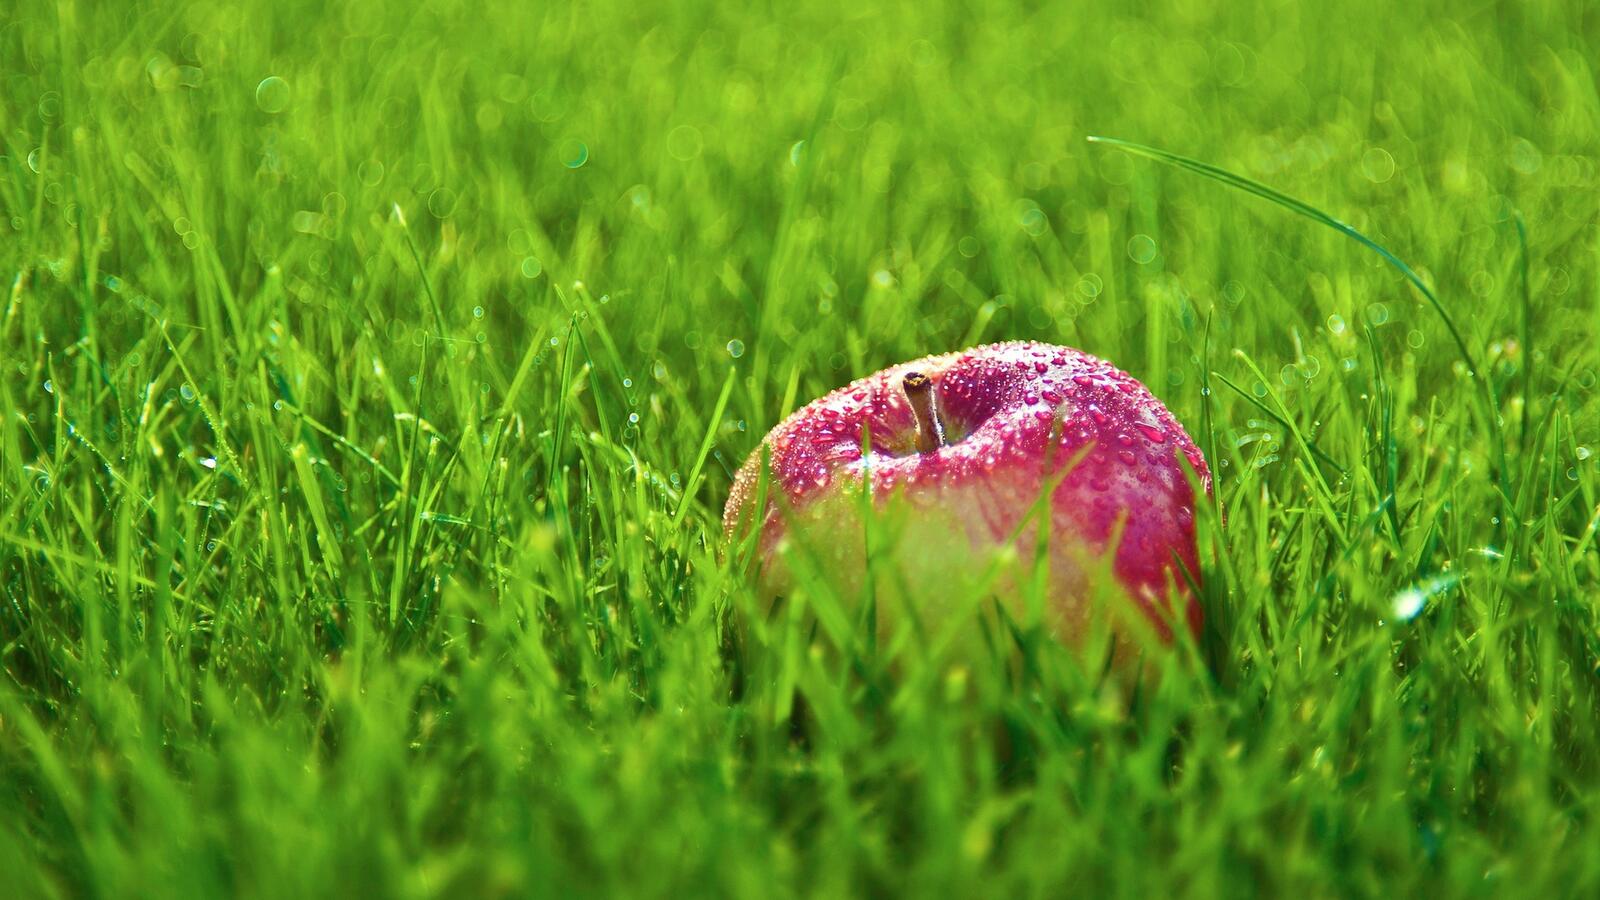 Free photo A red apple lies on green grass with raindrops on it